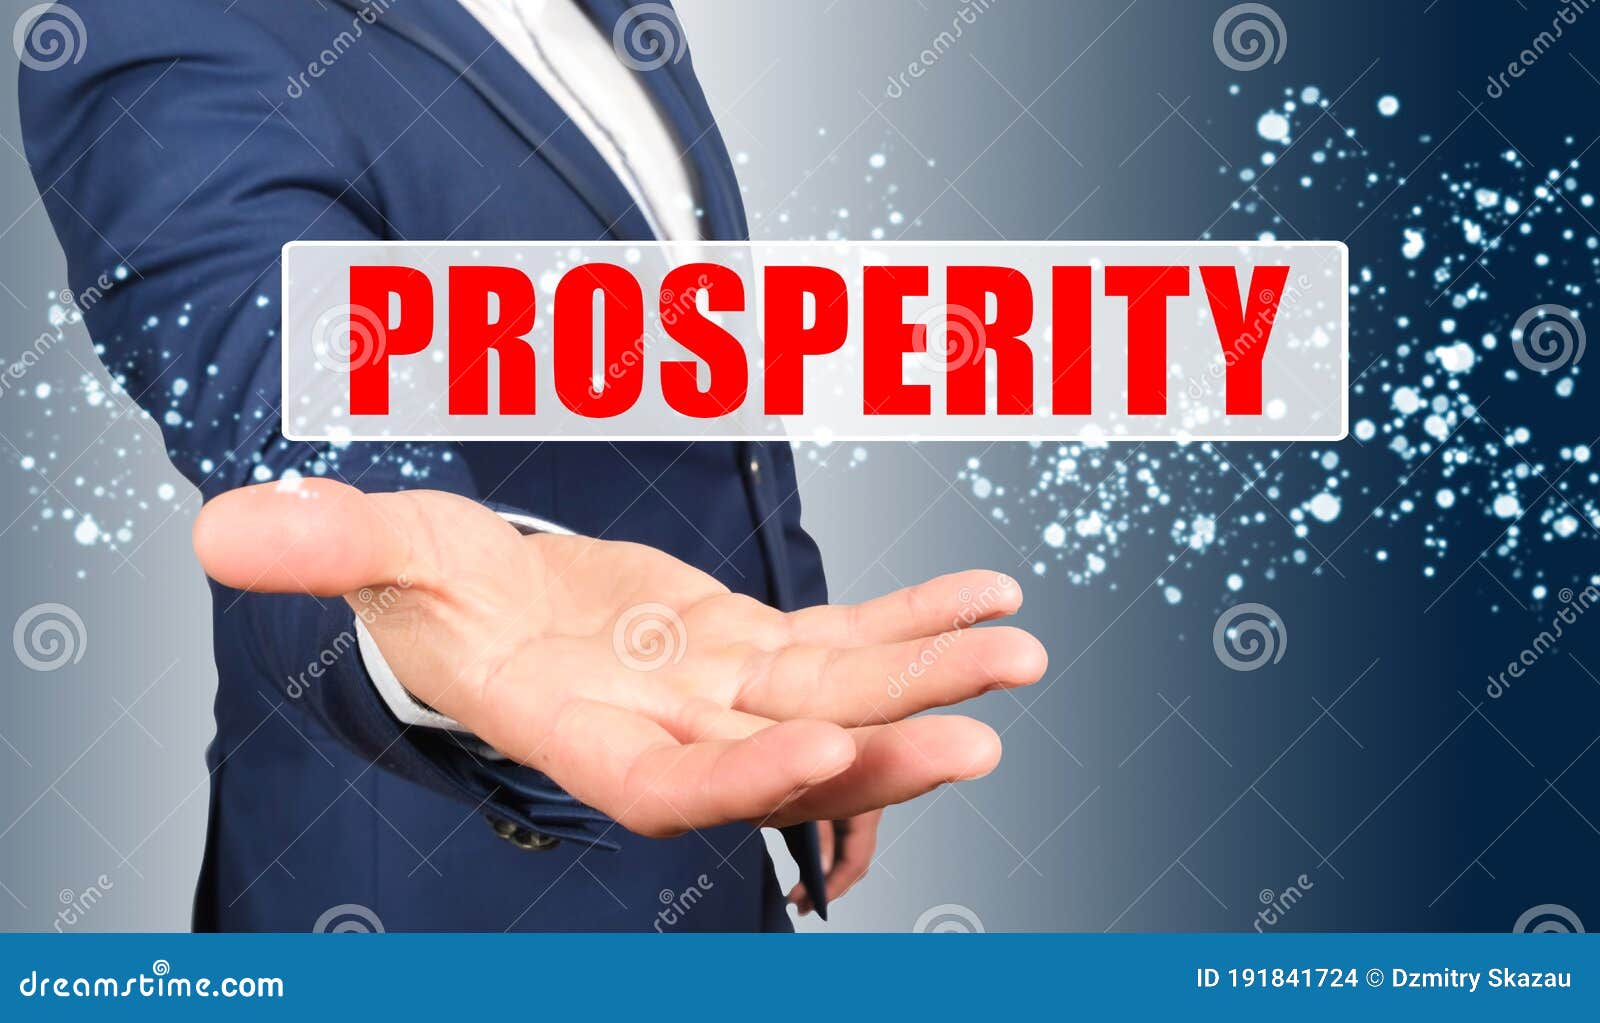 a businessman holds his hand, palm up, above the palm the inscription - prosperity